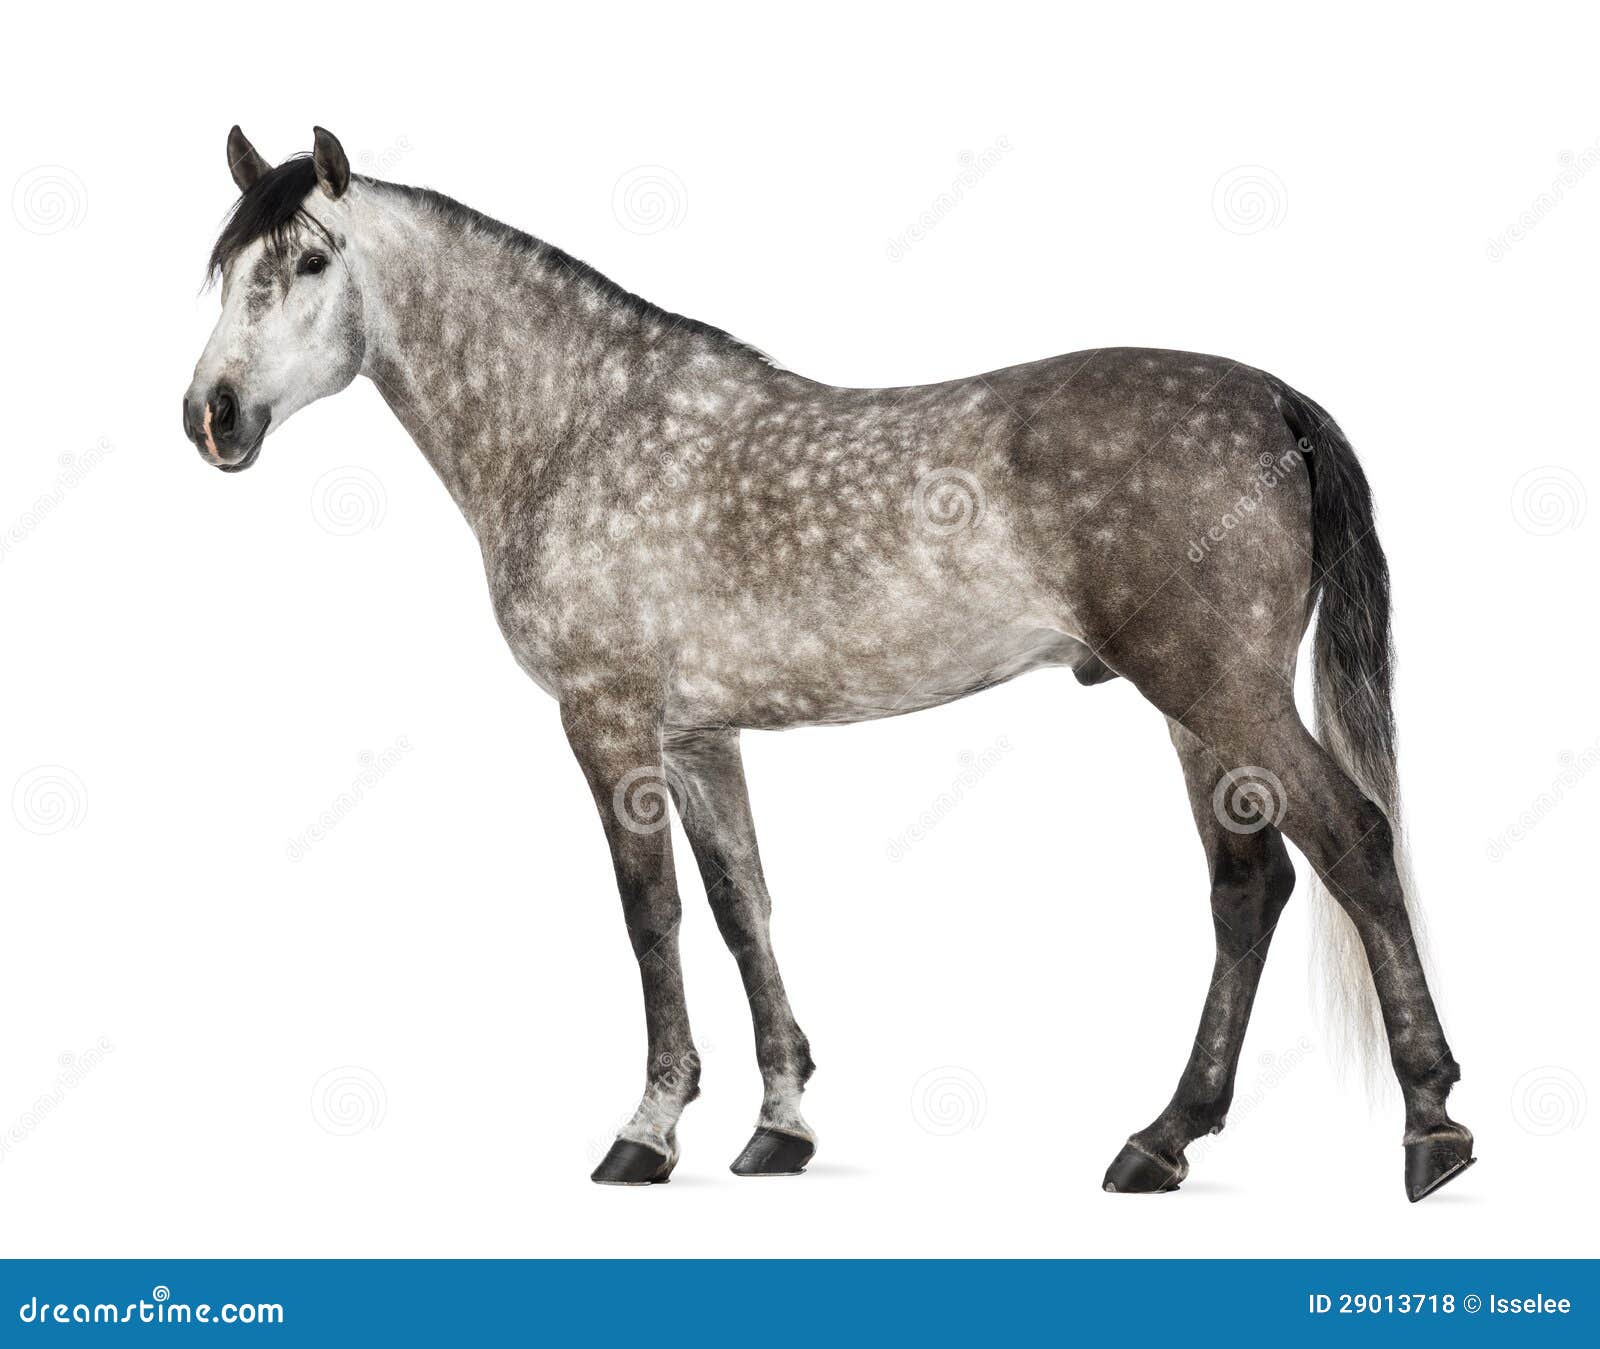 andalusian, 7 years old, also known as the pure spanish horse